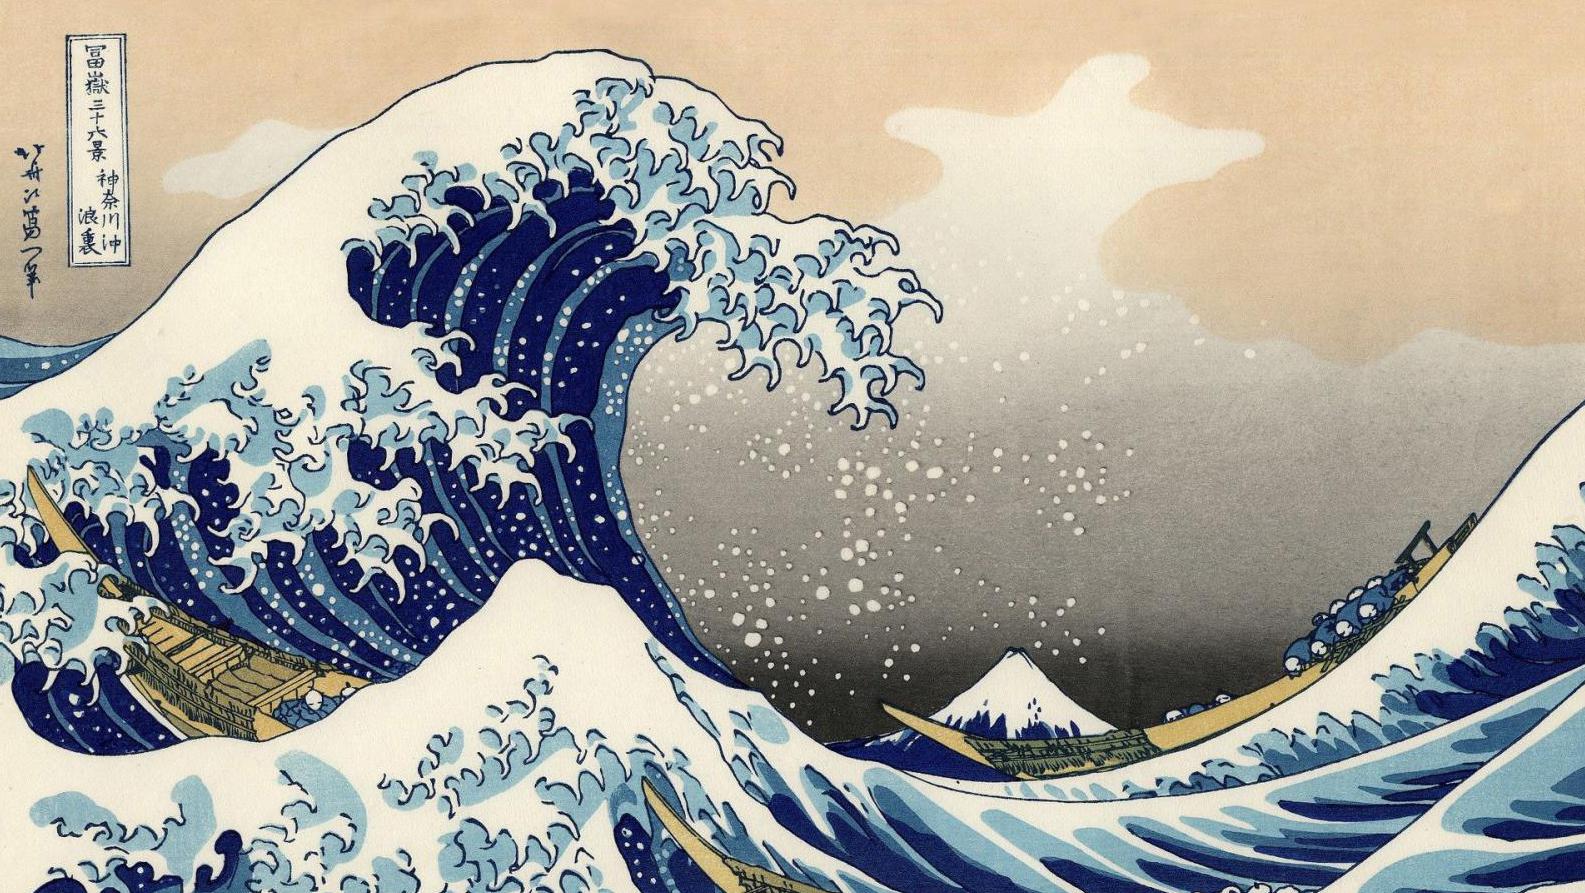   Art Market Overview: Hokusai, from Prints to NFTs